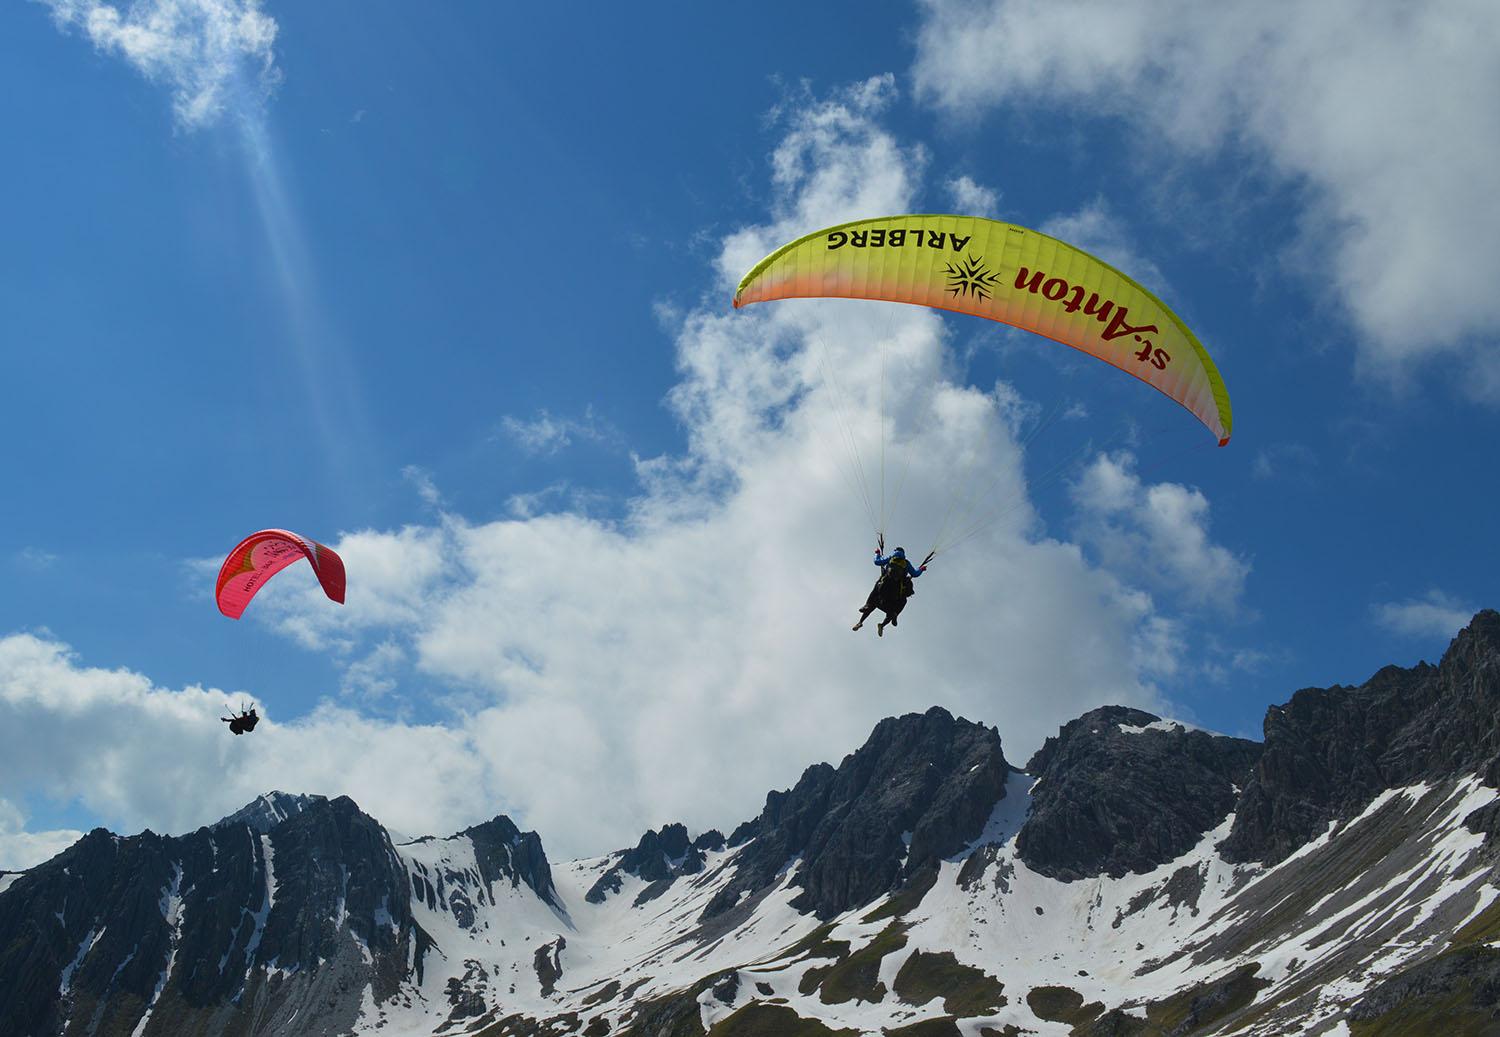 How it feels to paraglide over St Anton am Arlberg, Austria